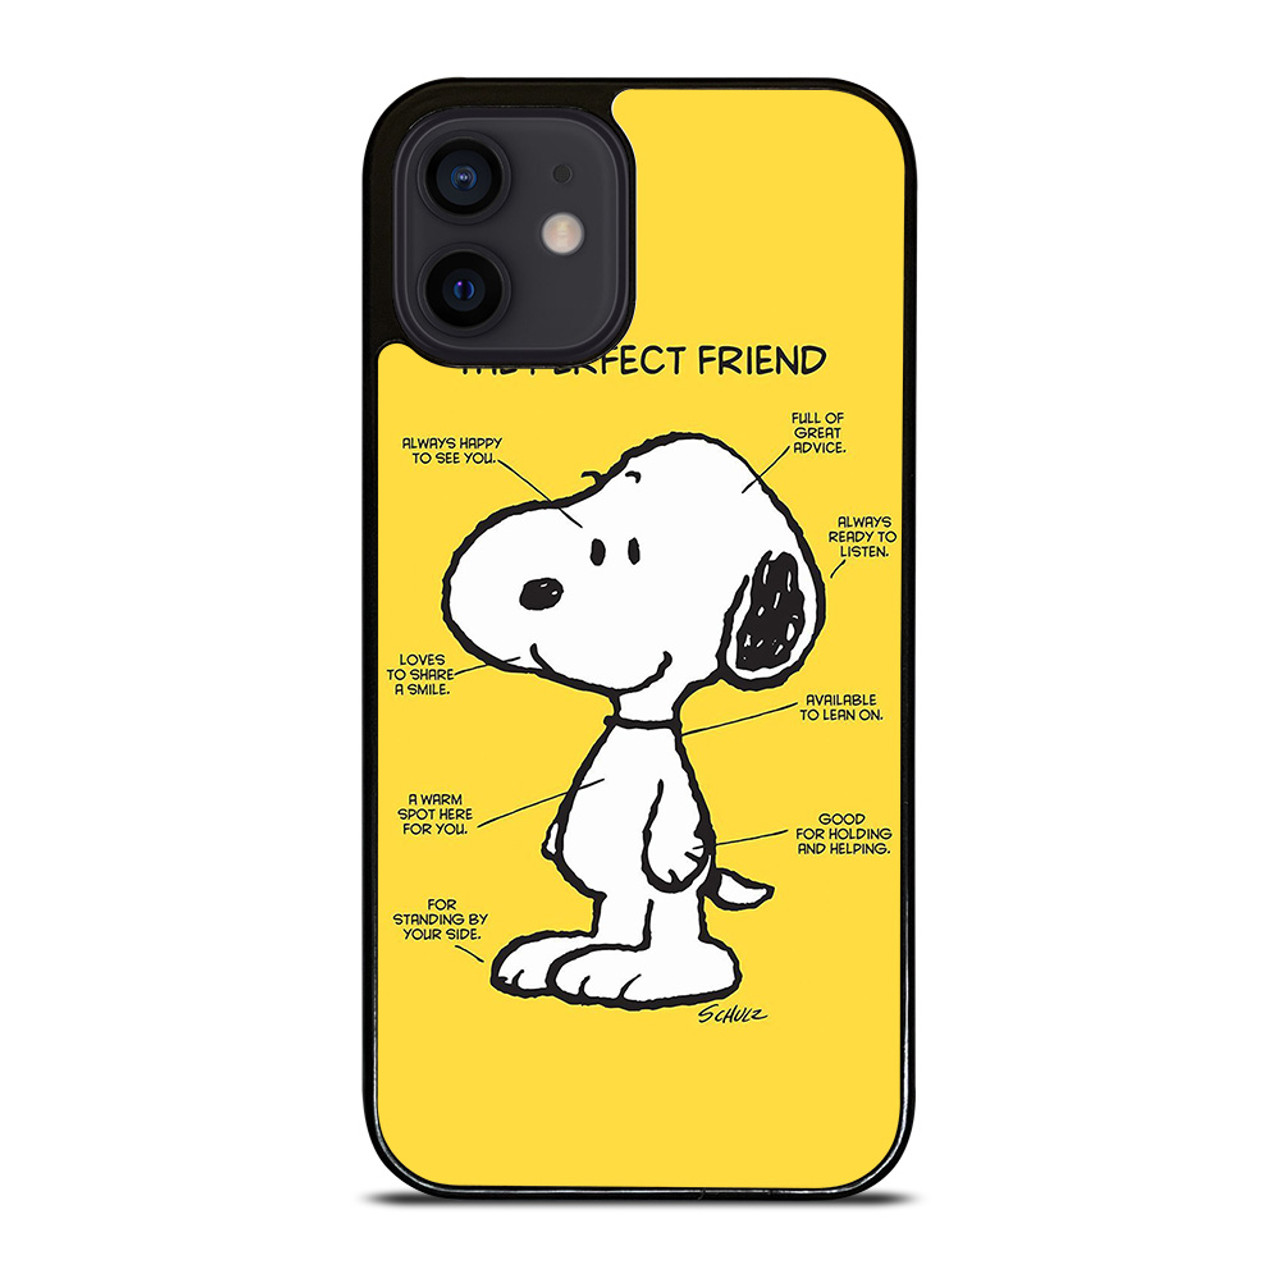 SNOOPY LOUIS VUITTON DAB STYLE iPhone 12 Case Cover